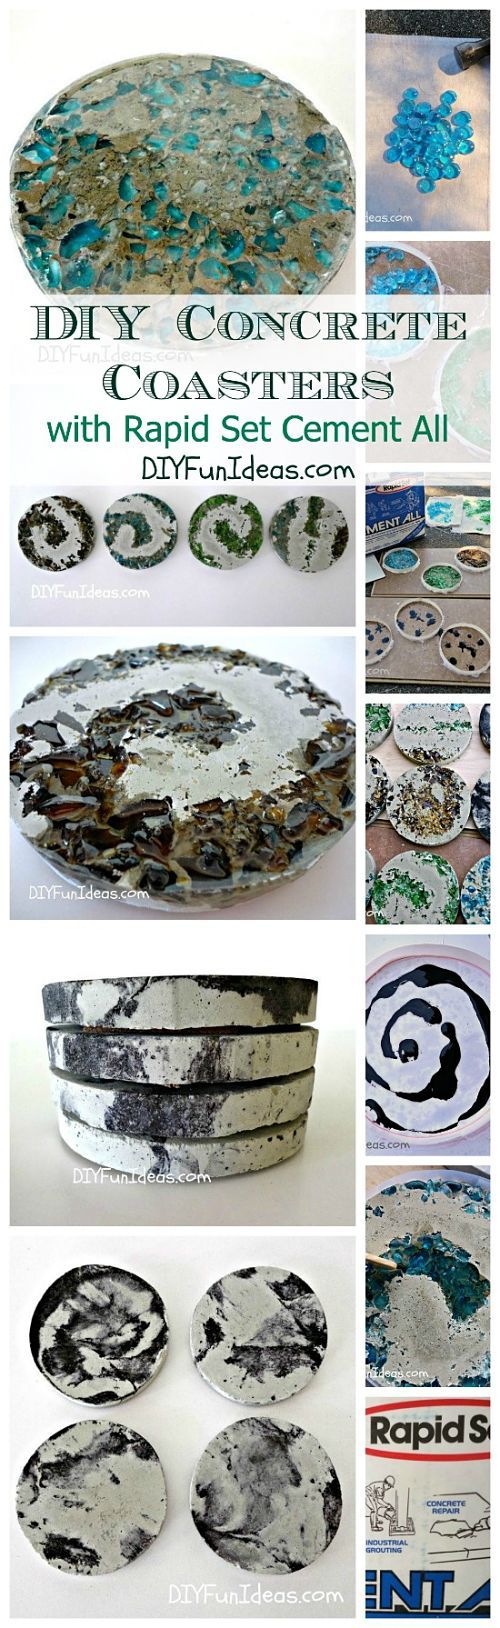 HOW TO MAKE CRUSHED GLASS & TIE-DYE CONCRETE COASTERS! from DIYFunIdeas.com